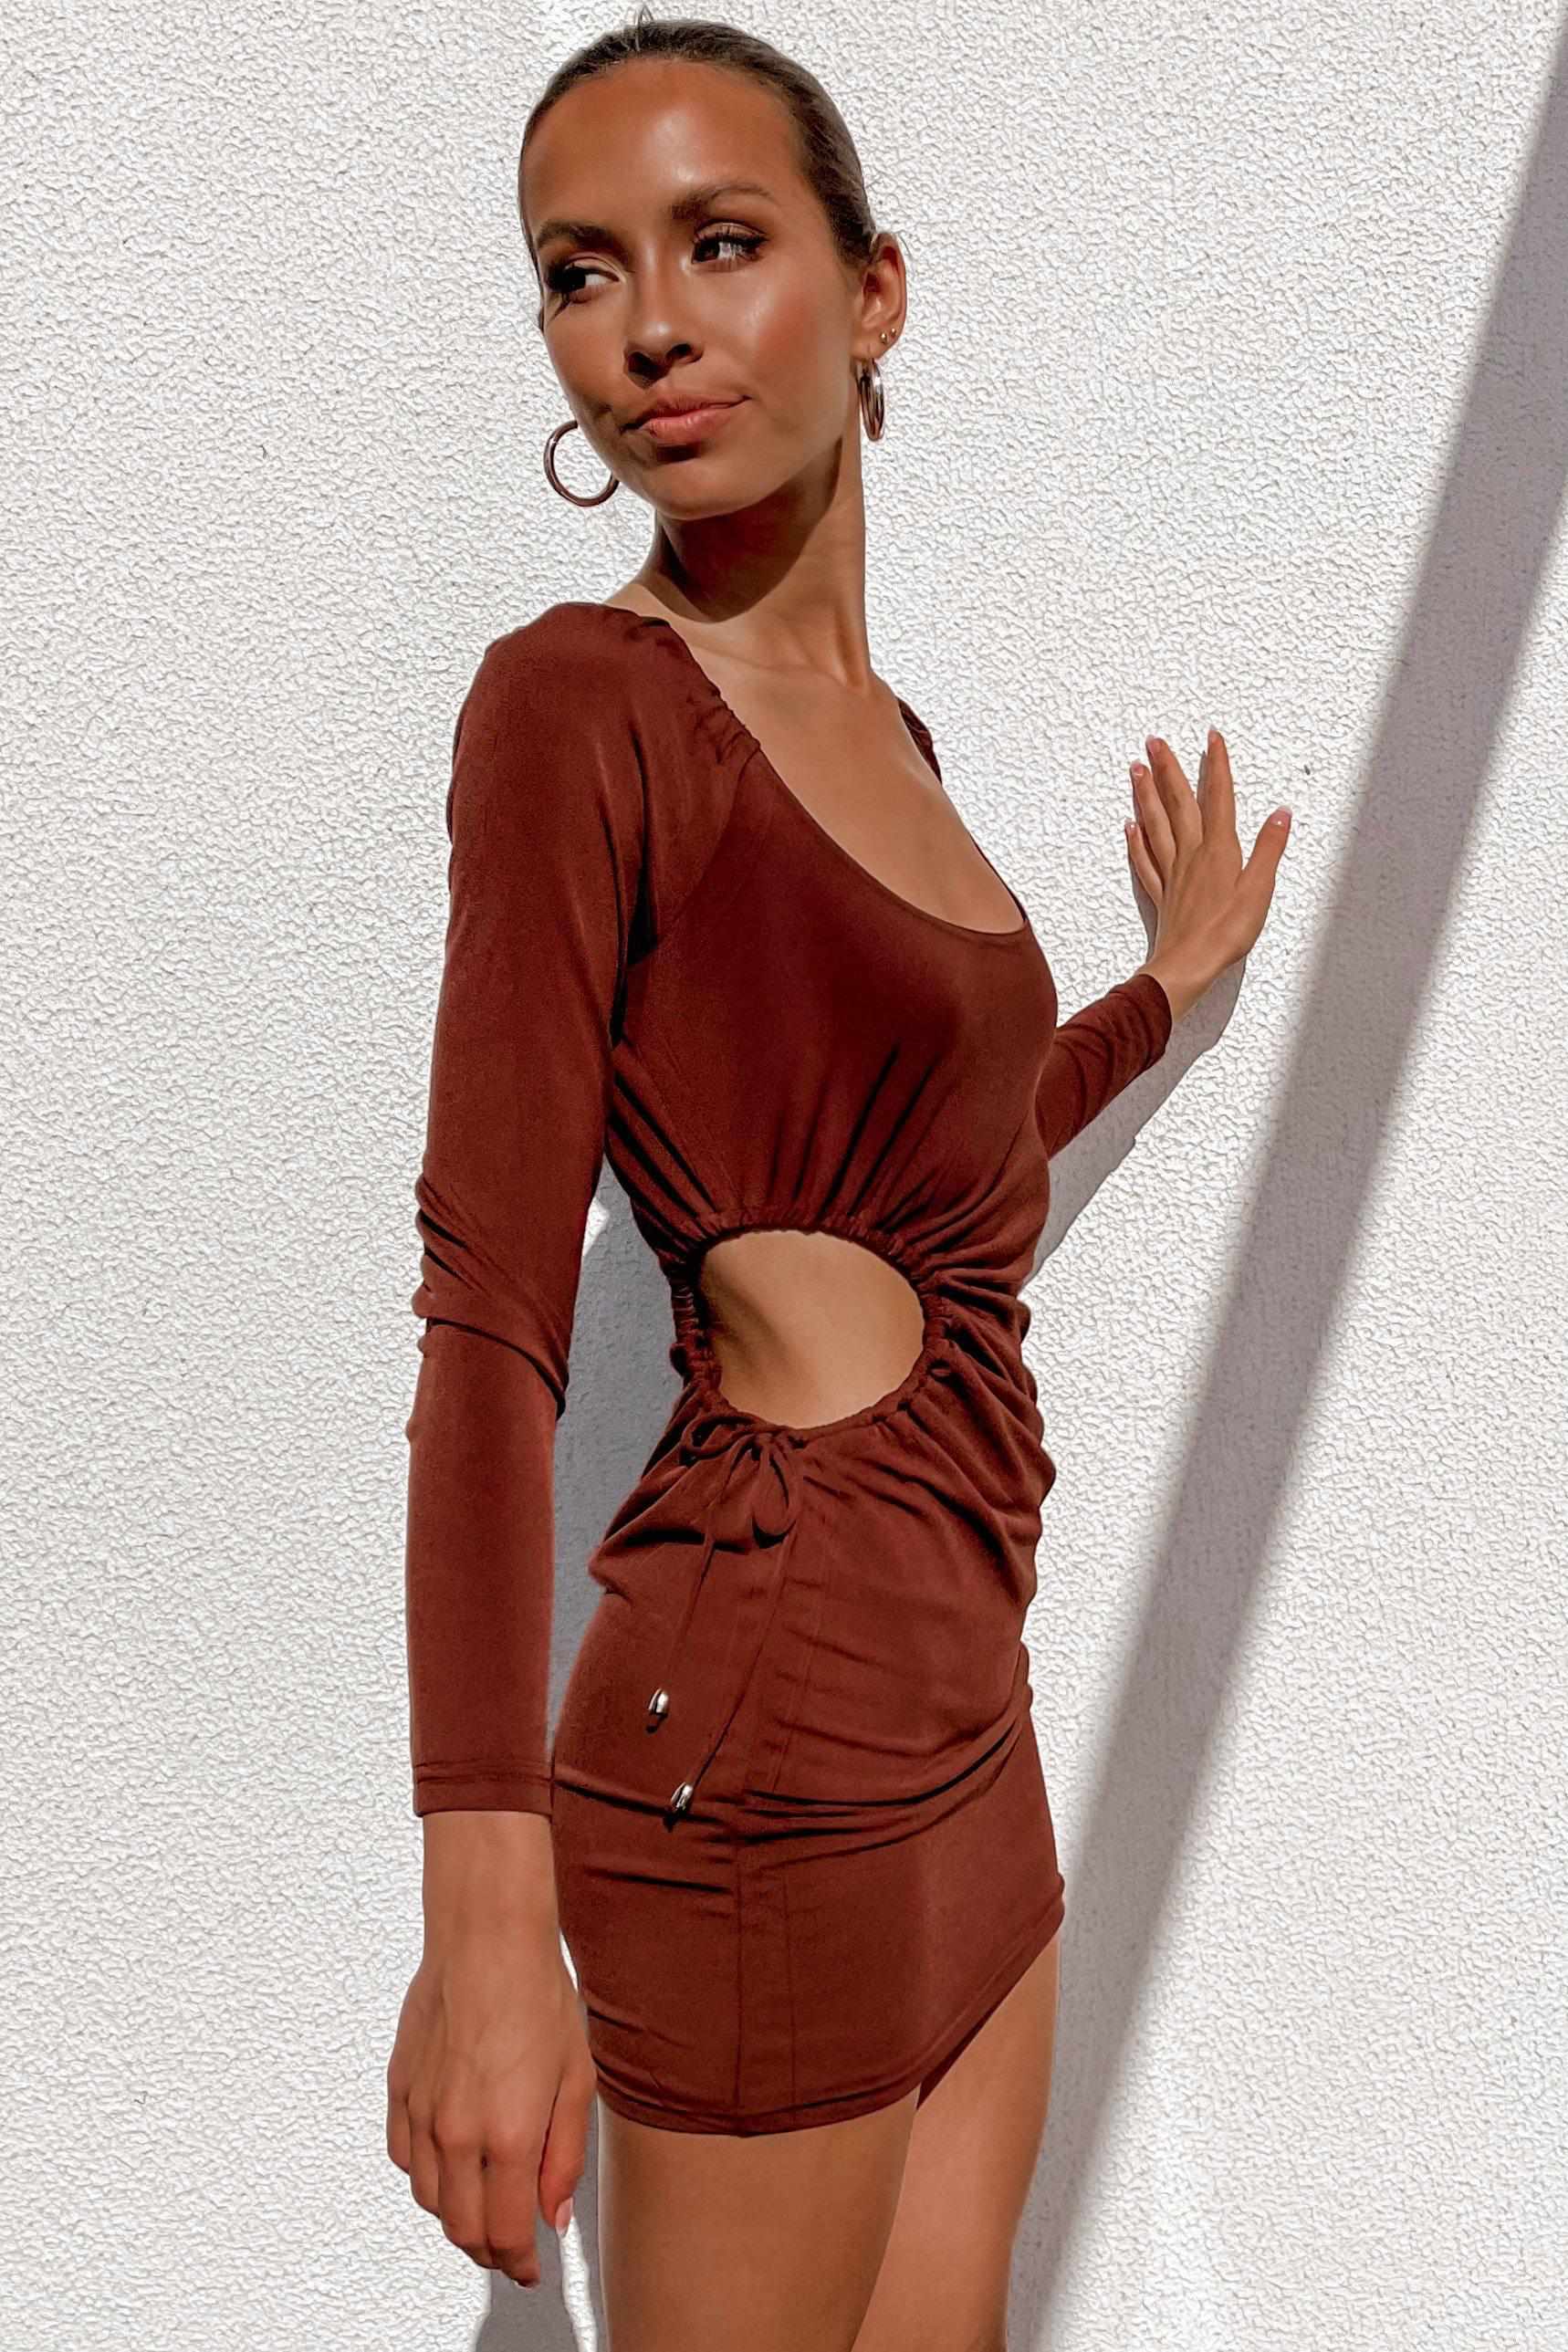 Just A Lover Dress, BASICS, BROWN, CUT OUT, DRESS, DRESSES, GATHERED, LONG SLEEVE, MINI DRESS, RED, Sale, Just A Lover Dress only $66.00 @ MISHKAH ONLINE FASHION BOUTIQUE, Shop The Latest Women's Dresses - Our New Just A Lover Dress is only $66.00, @ MISHKAH ONLINE FASHION BOUTIQUE-MISHKAH